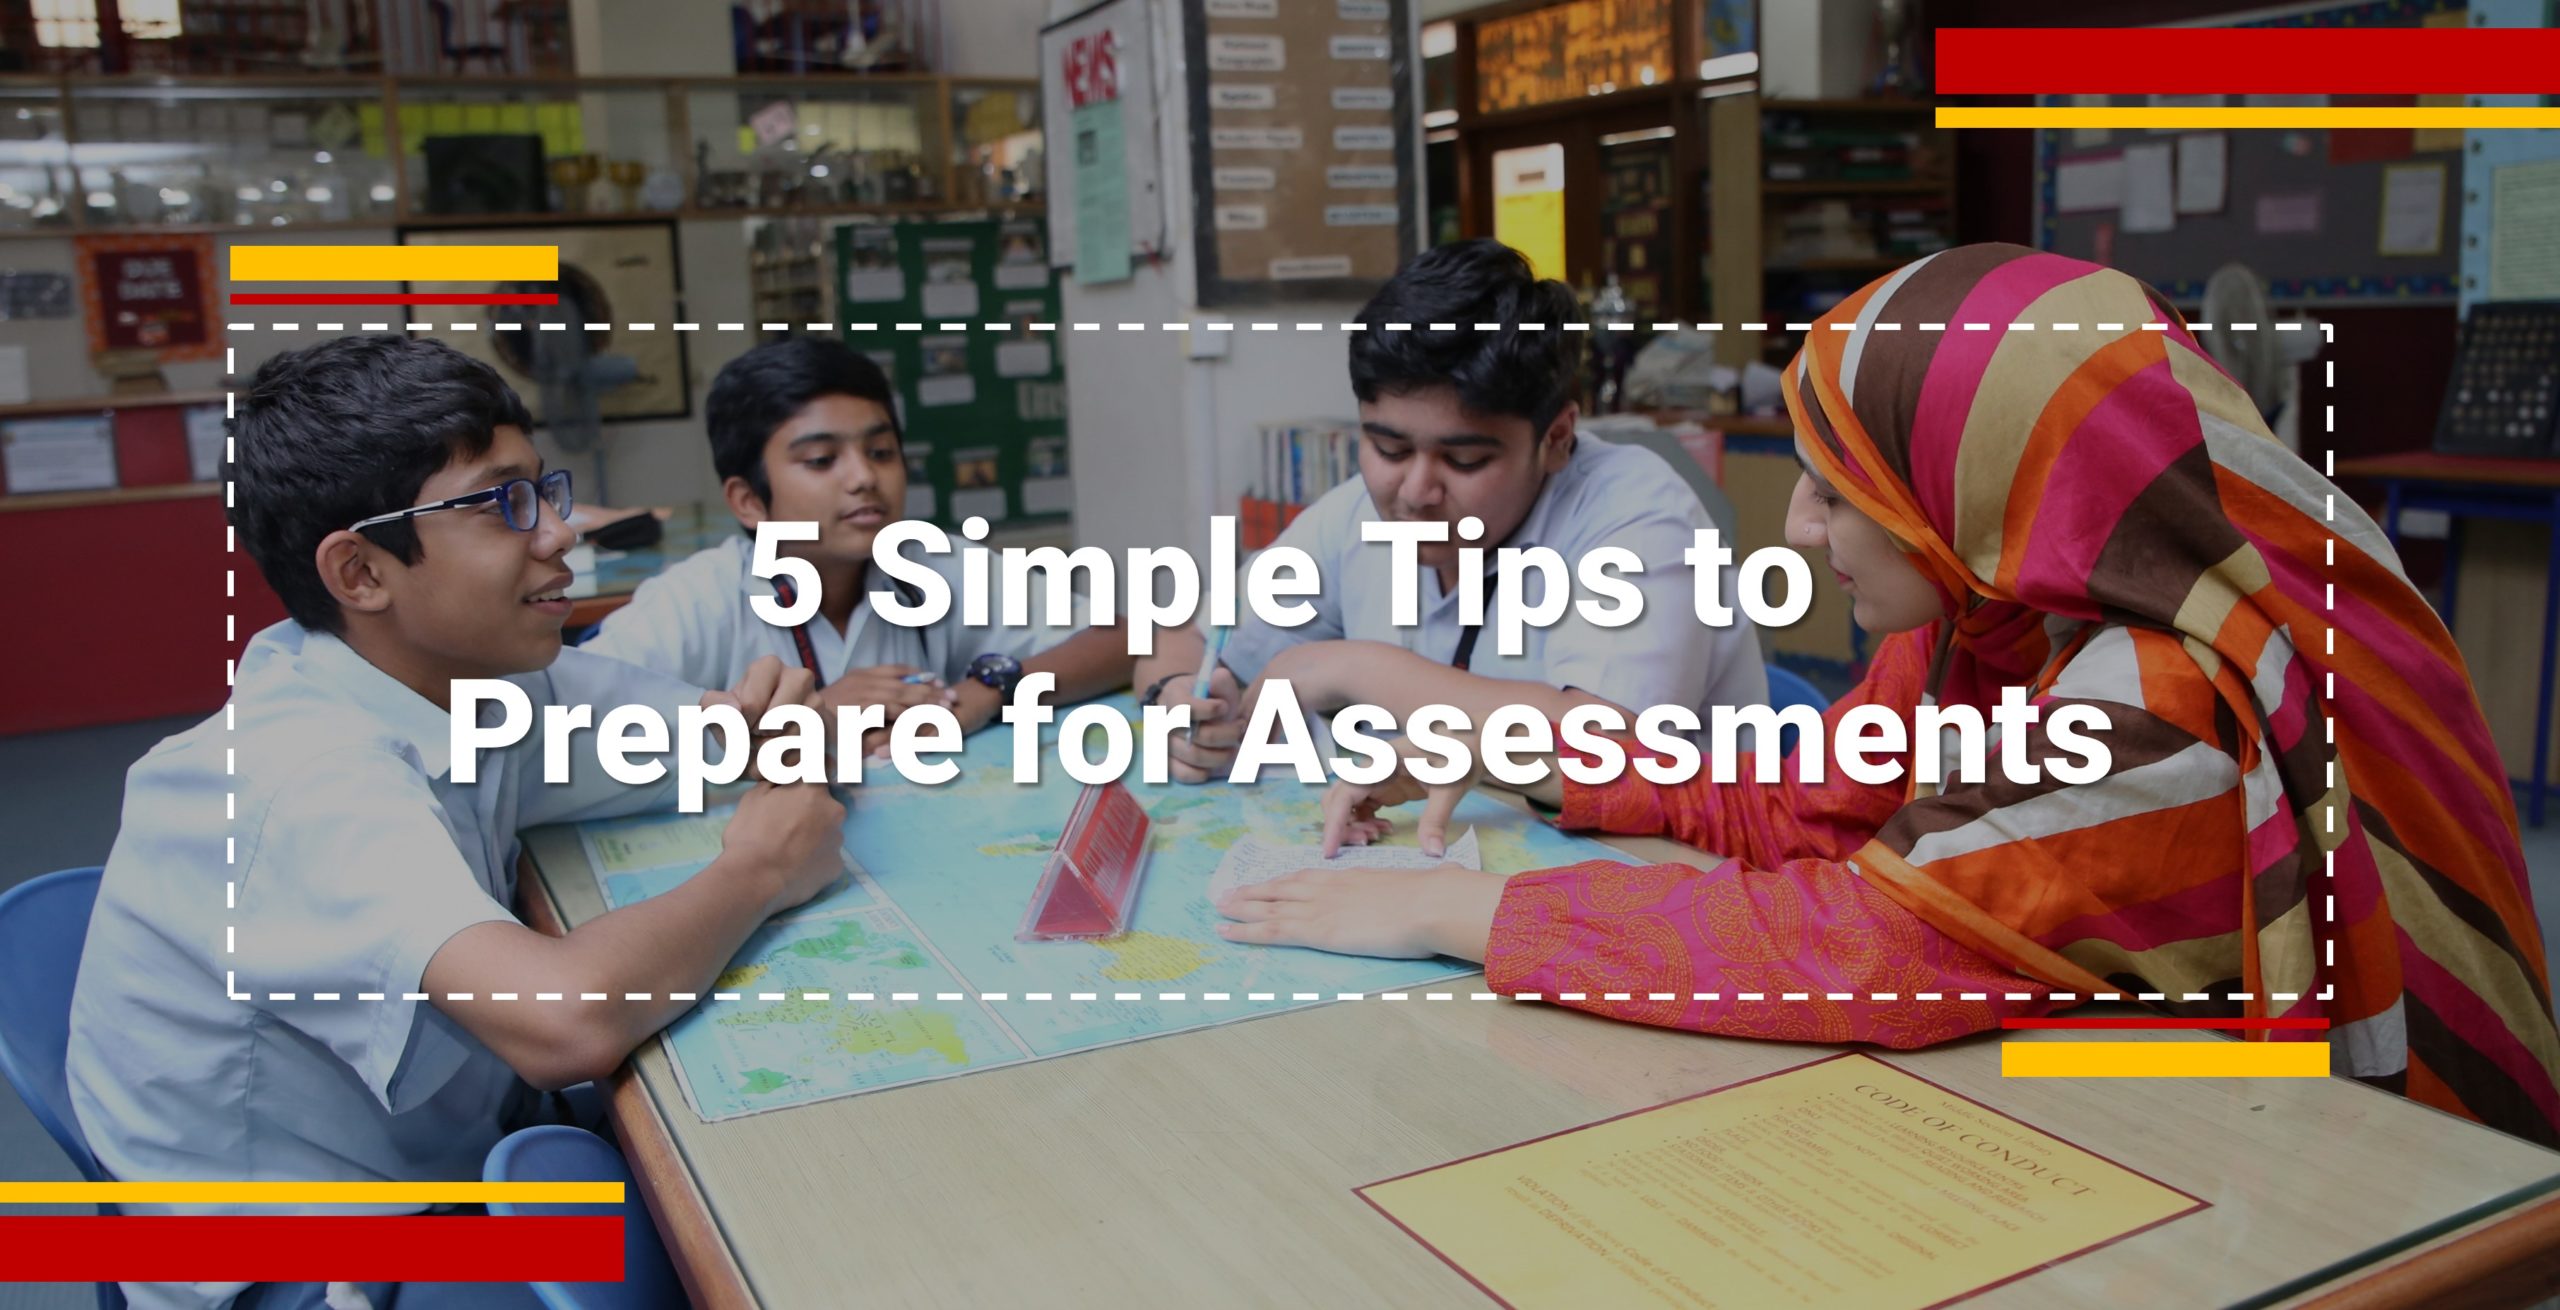 5 Simple Tips to Prepare for Assessments